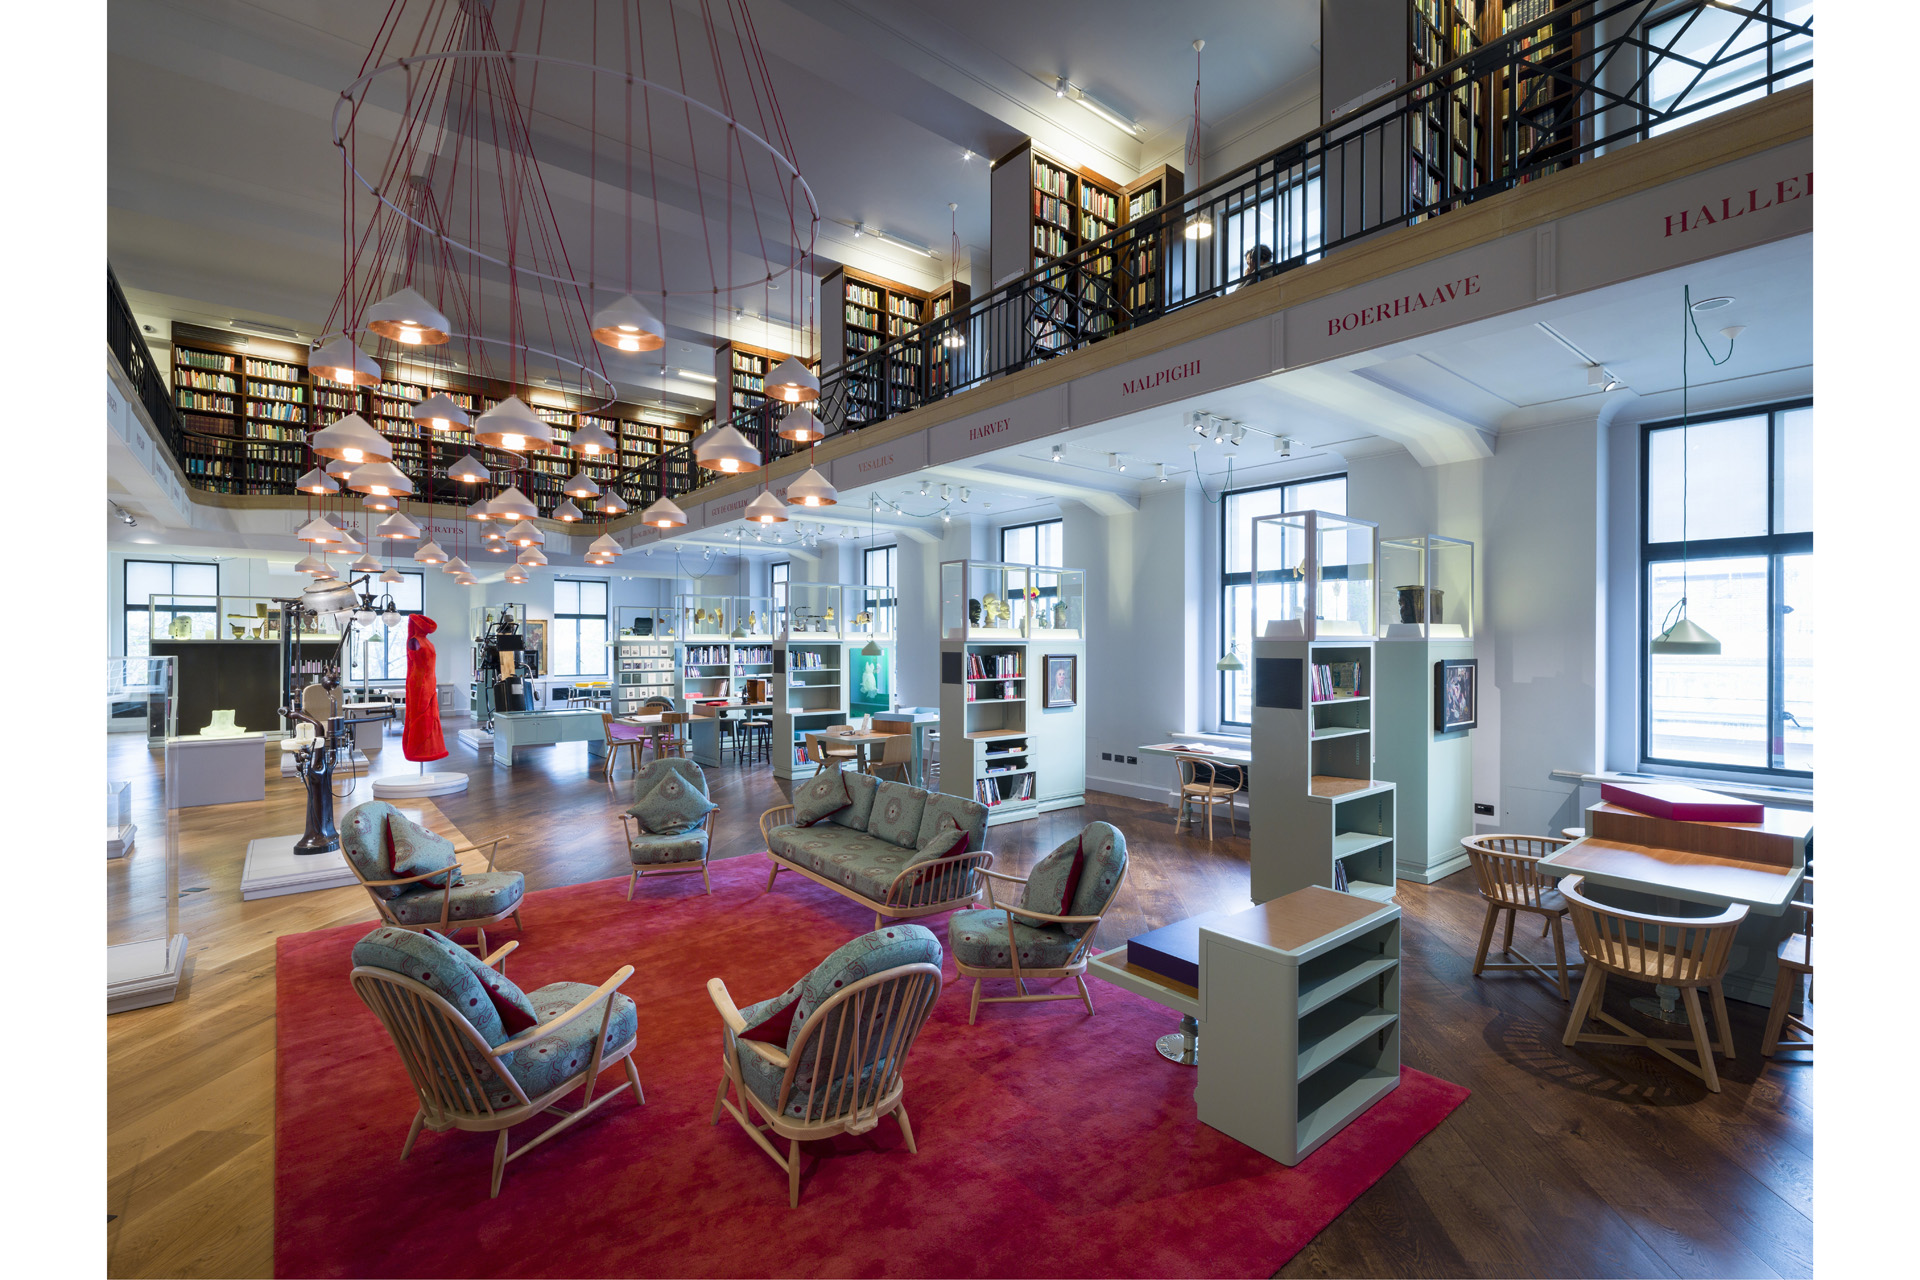 Wellcome Library with arm chairs and books